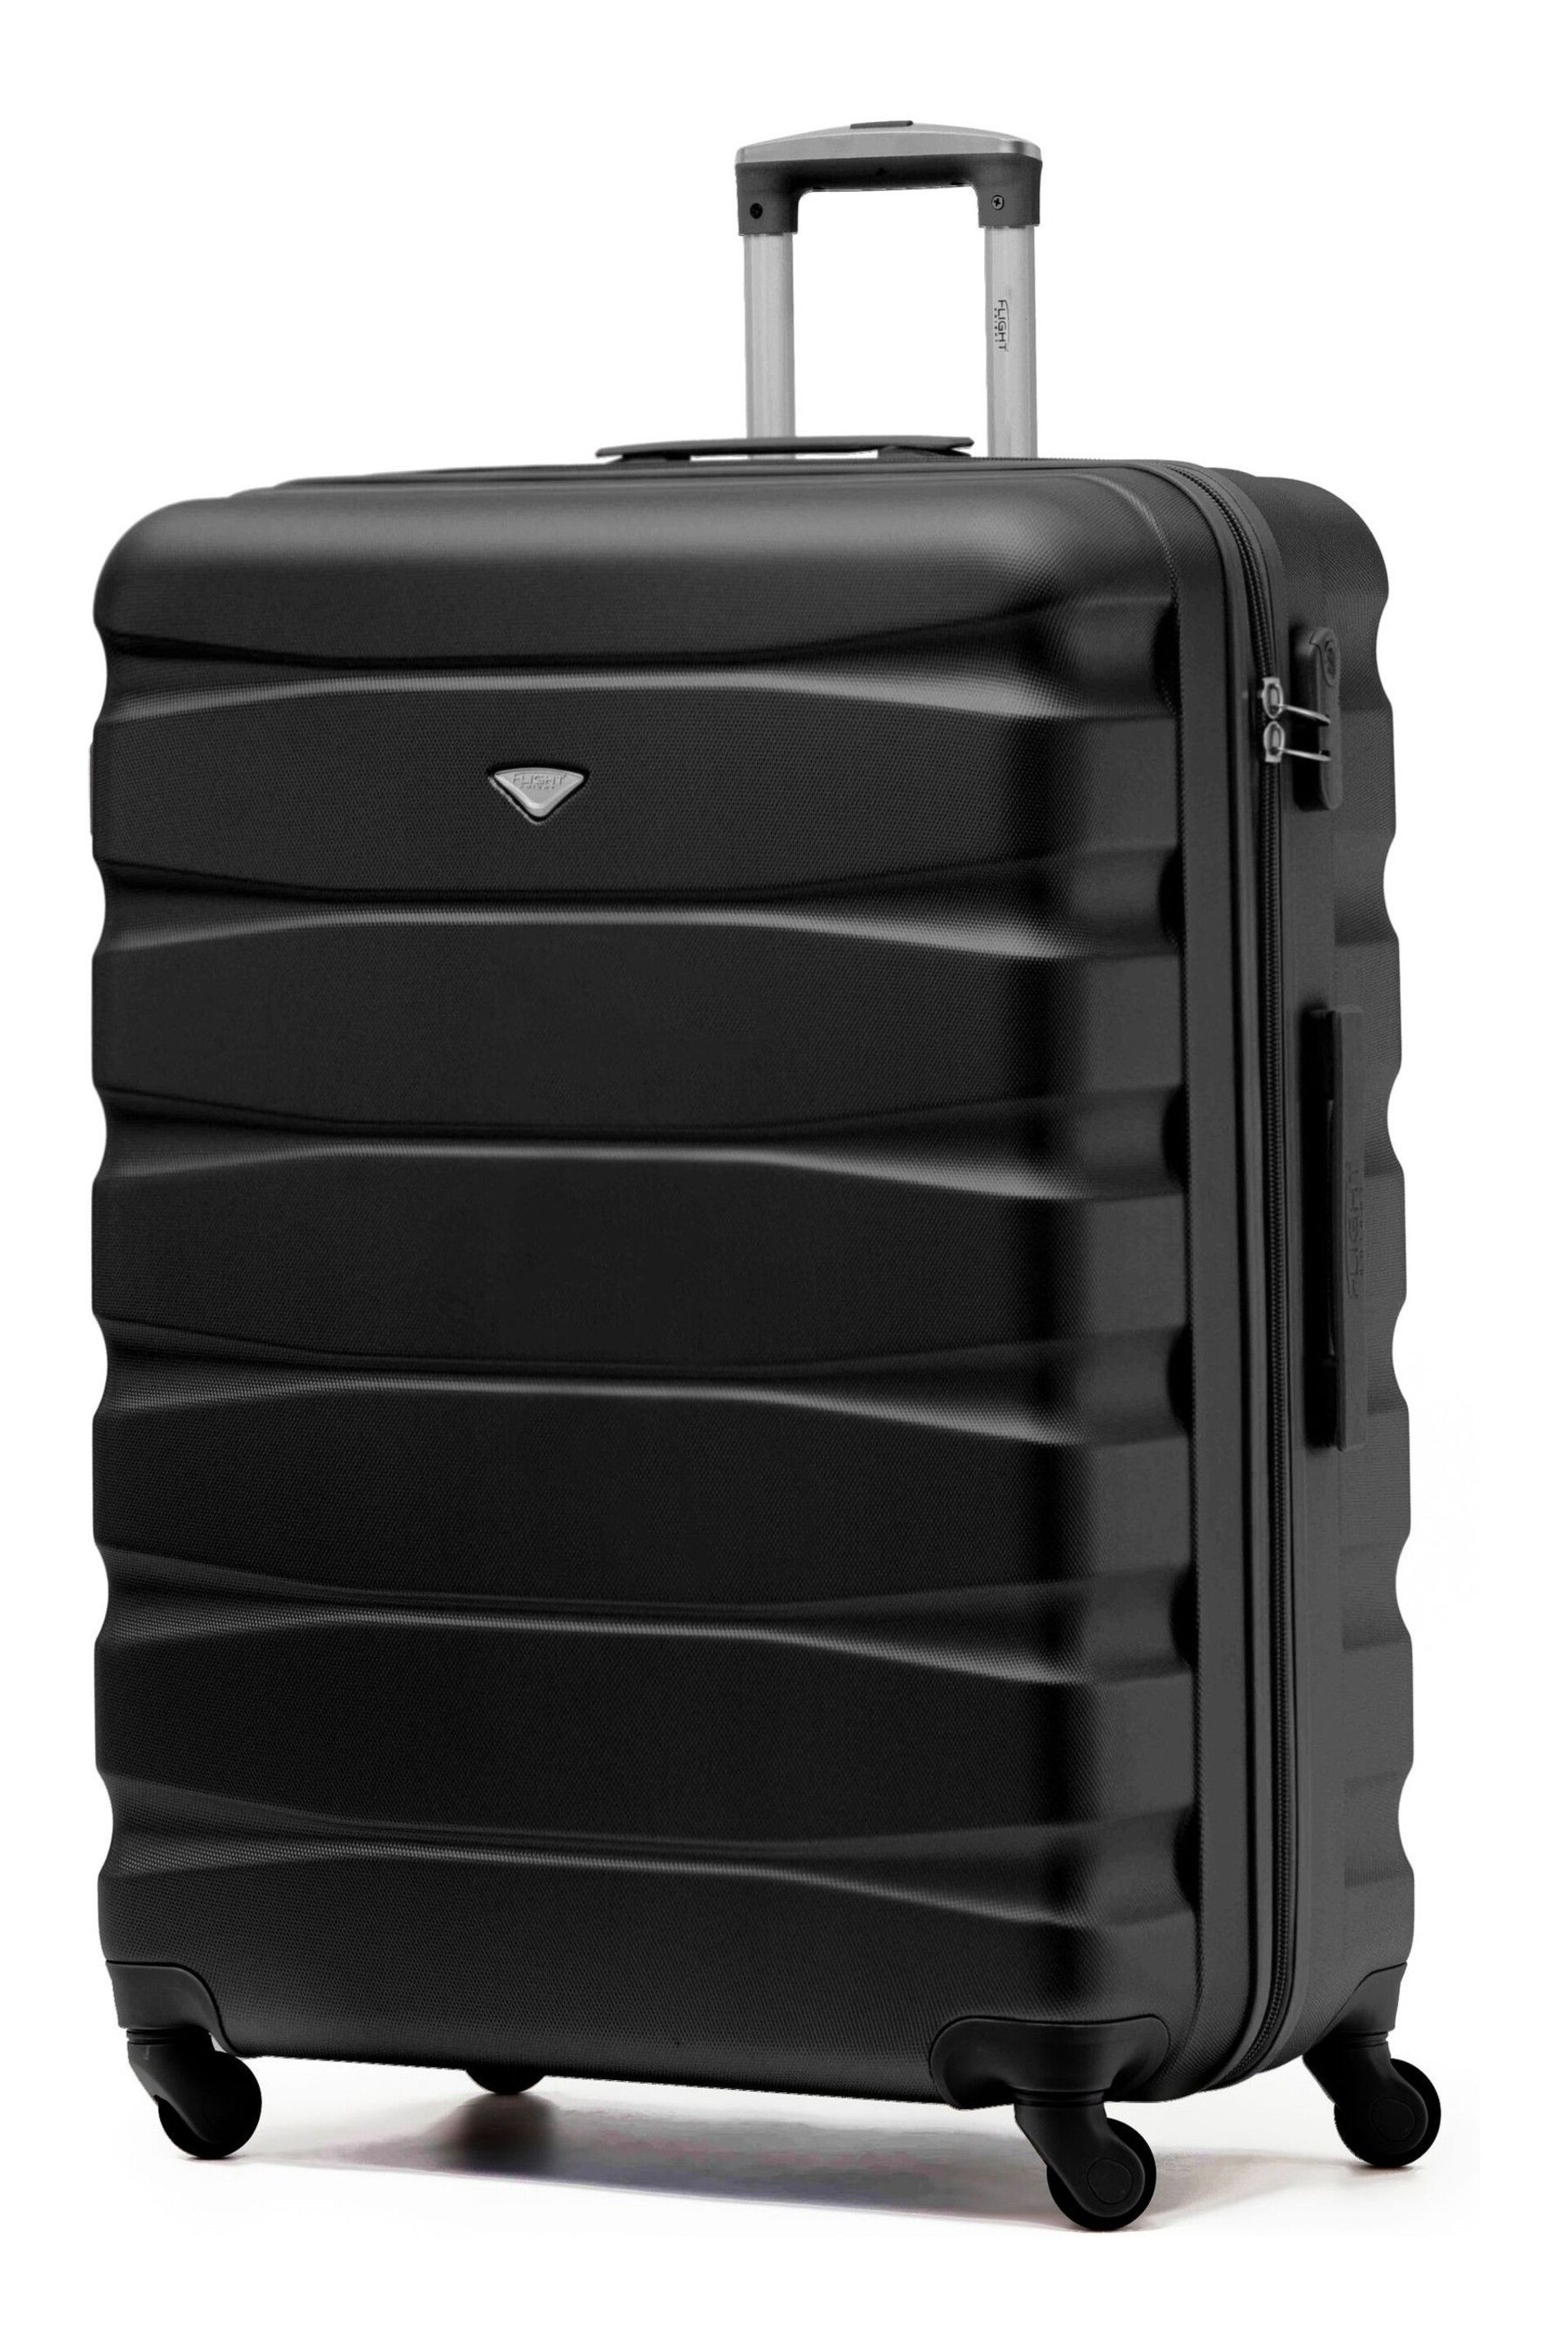 Flight Knight Large Hardcase Lightweight Check In Suitcase With 4 Wheels - Image 1 of 1